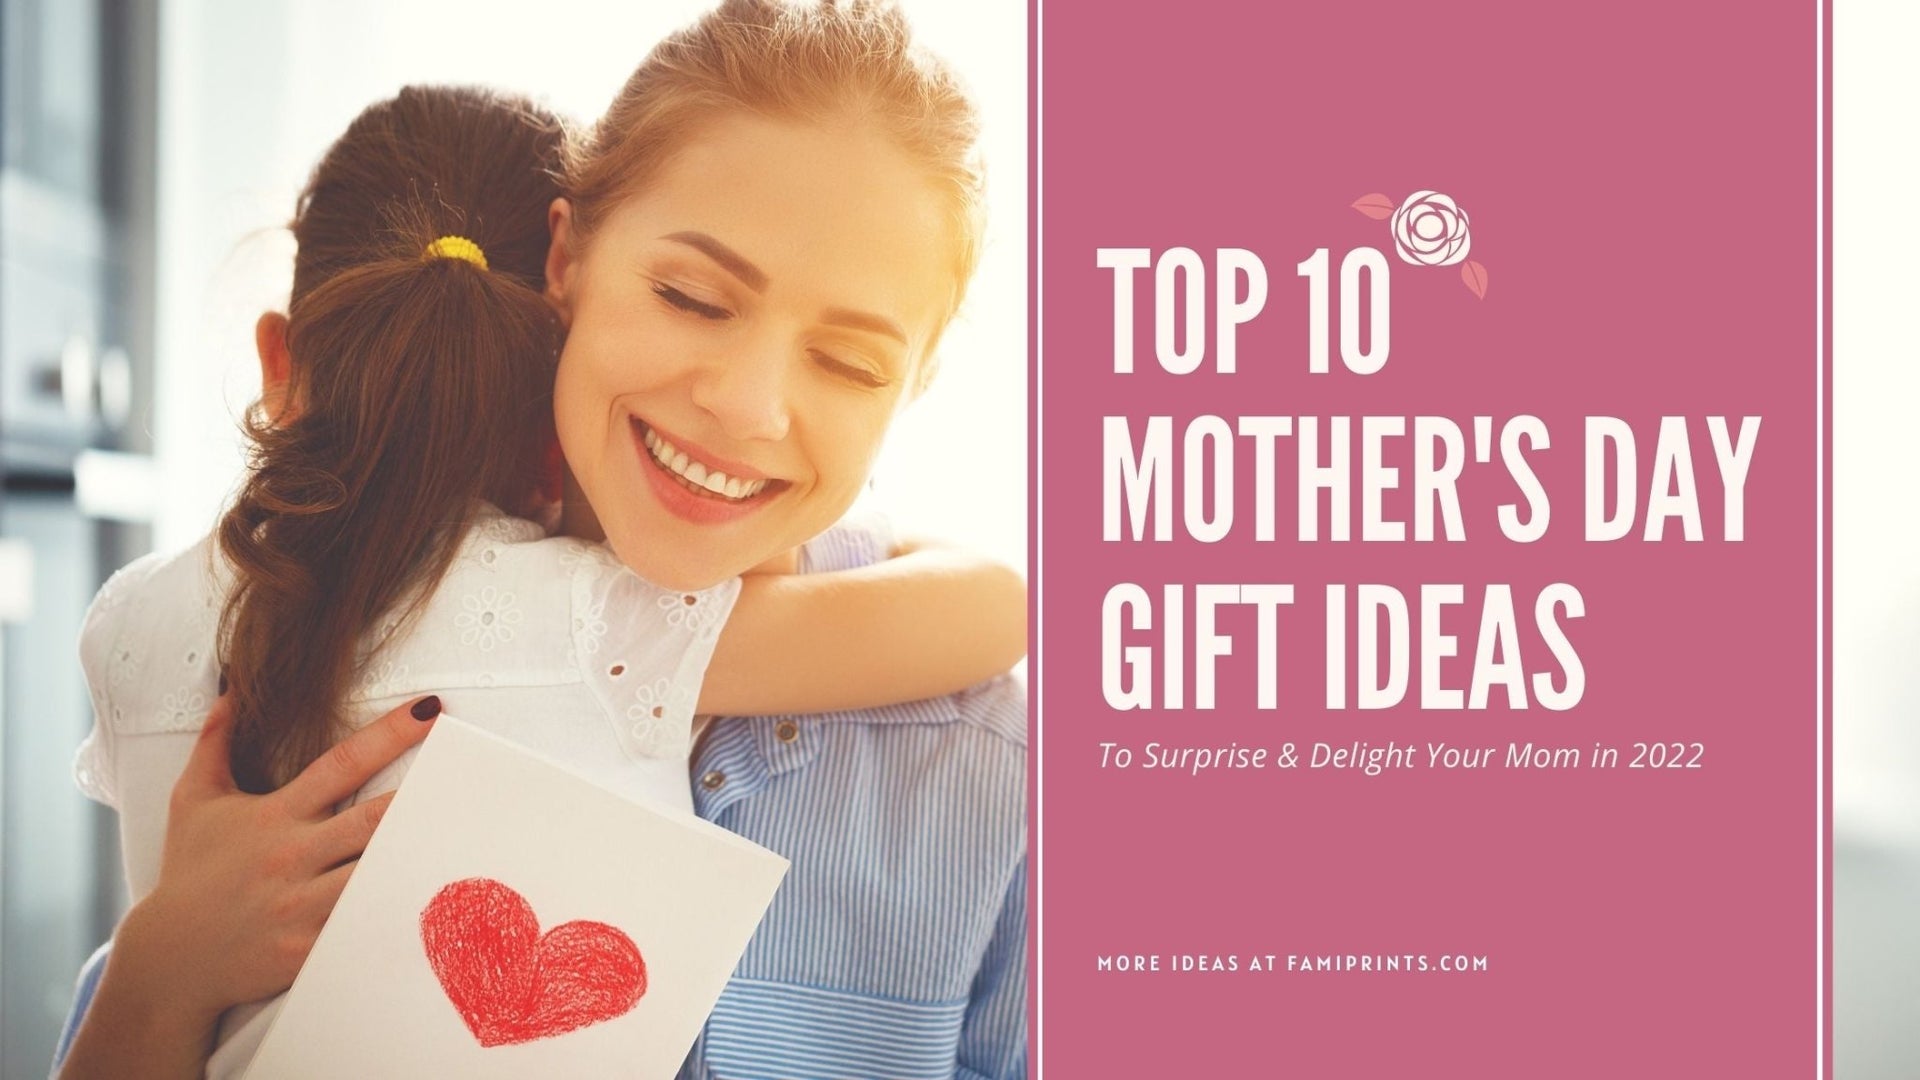 25 Best Mothers Day Gifts From Son That She'll Love (2022)